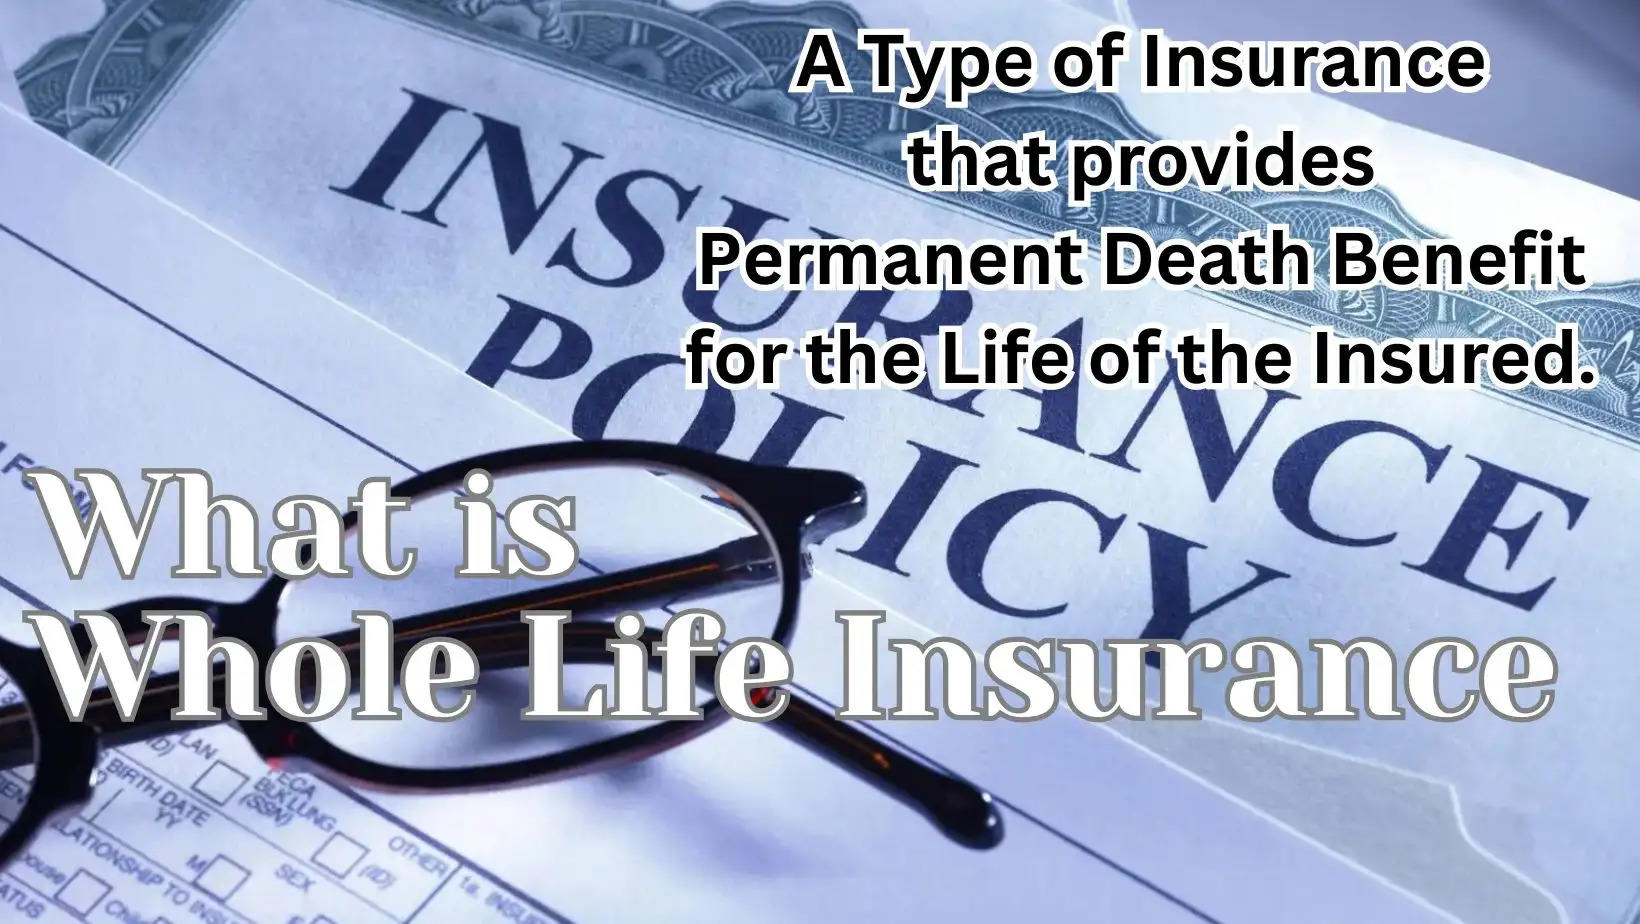 What is Whole Life Insurance, Whole Life Insurance Policy